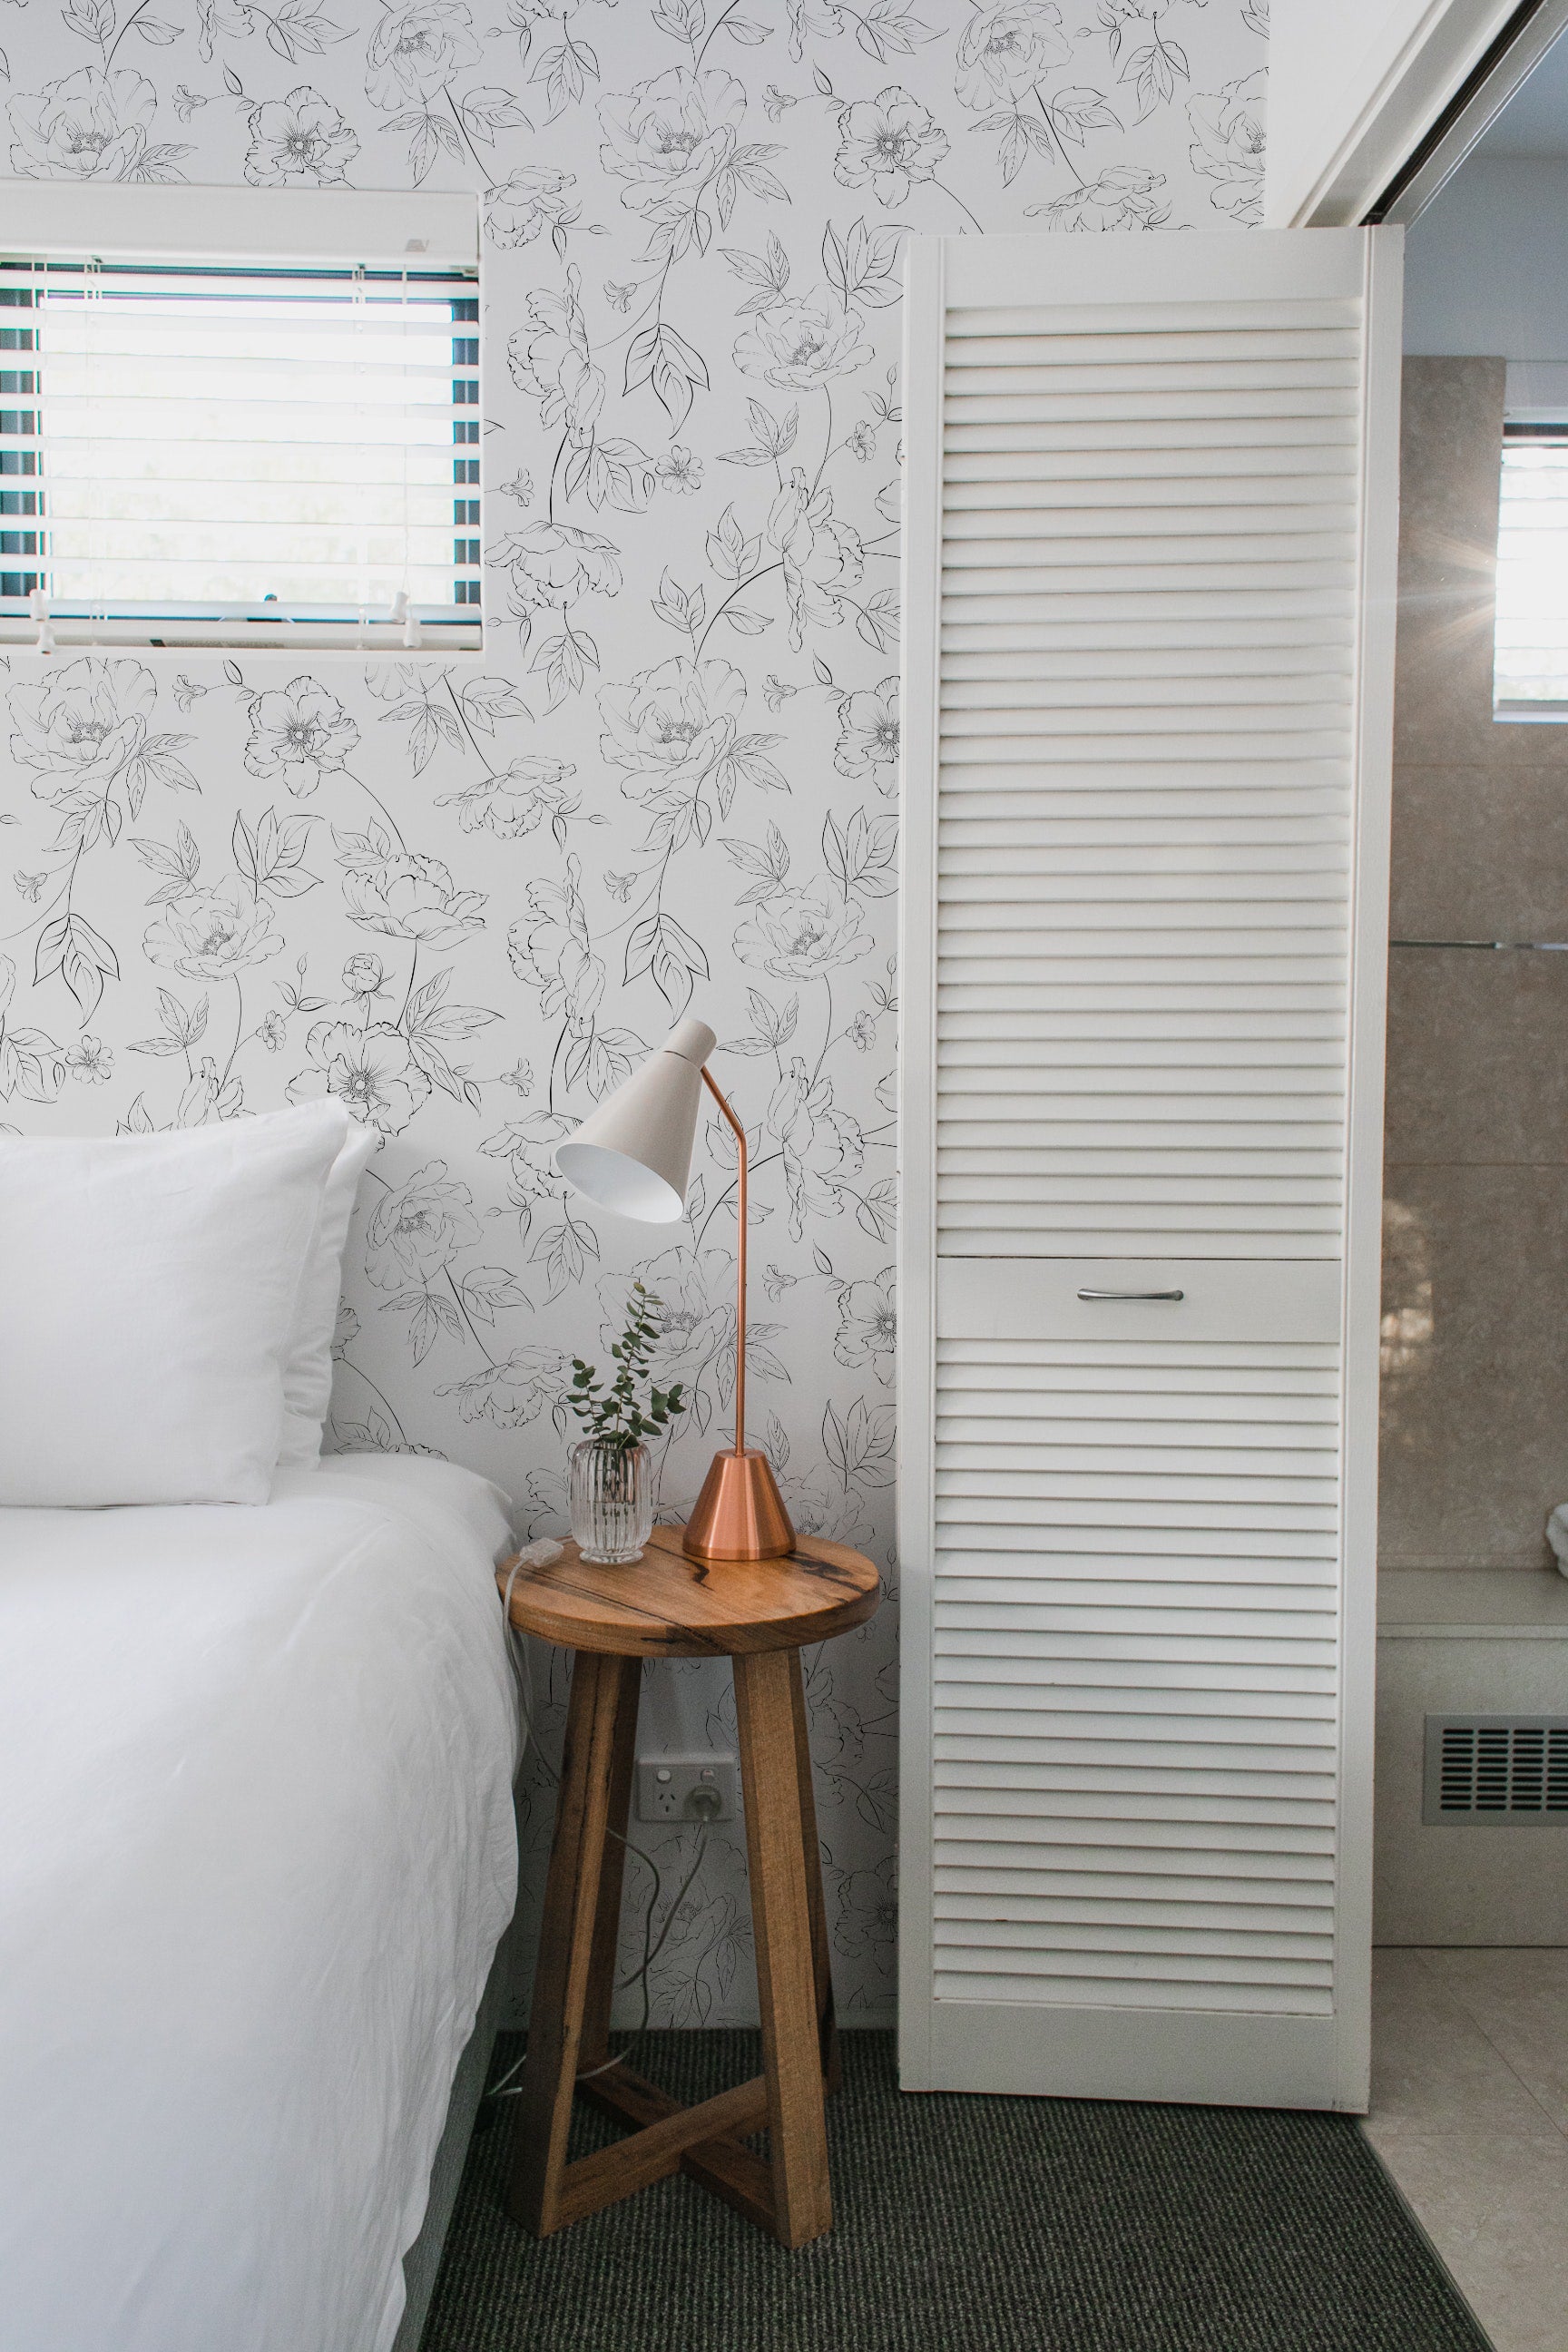 Cozy bedroom corner with Dainty Floral Line Wallpaper, showcasing a laptop on a bed with white linens and fresh flowers